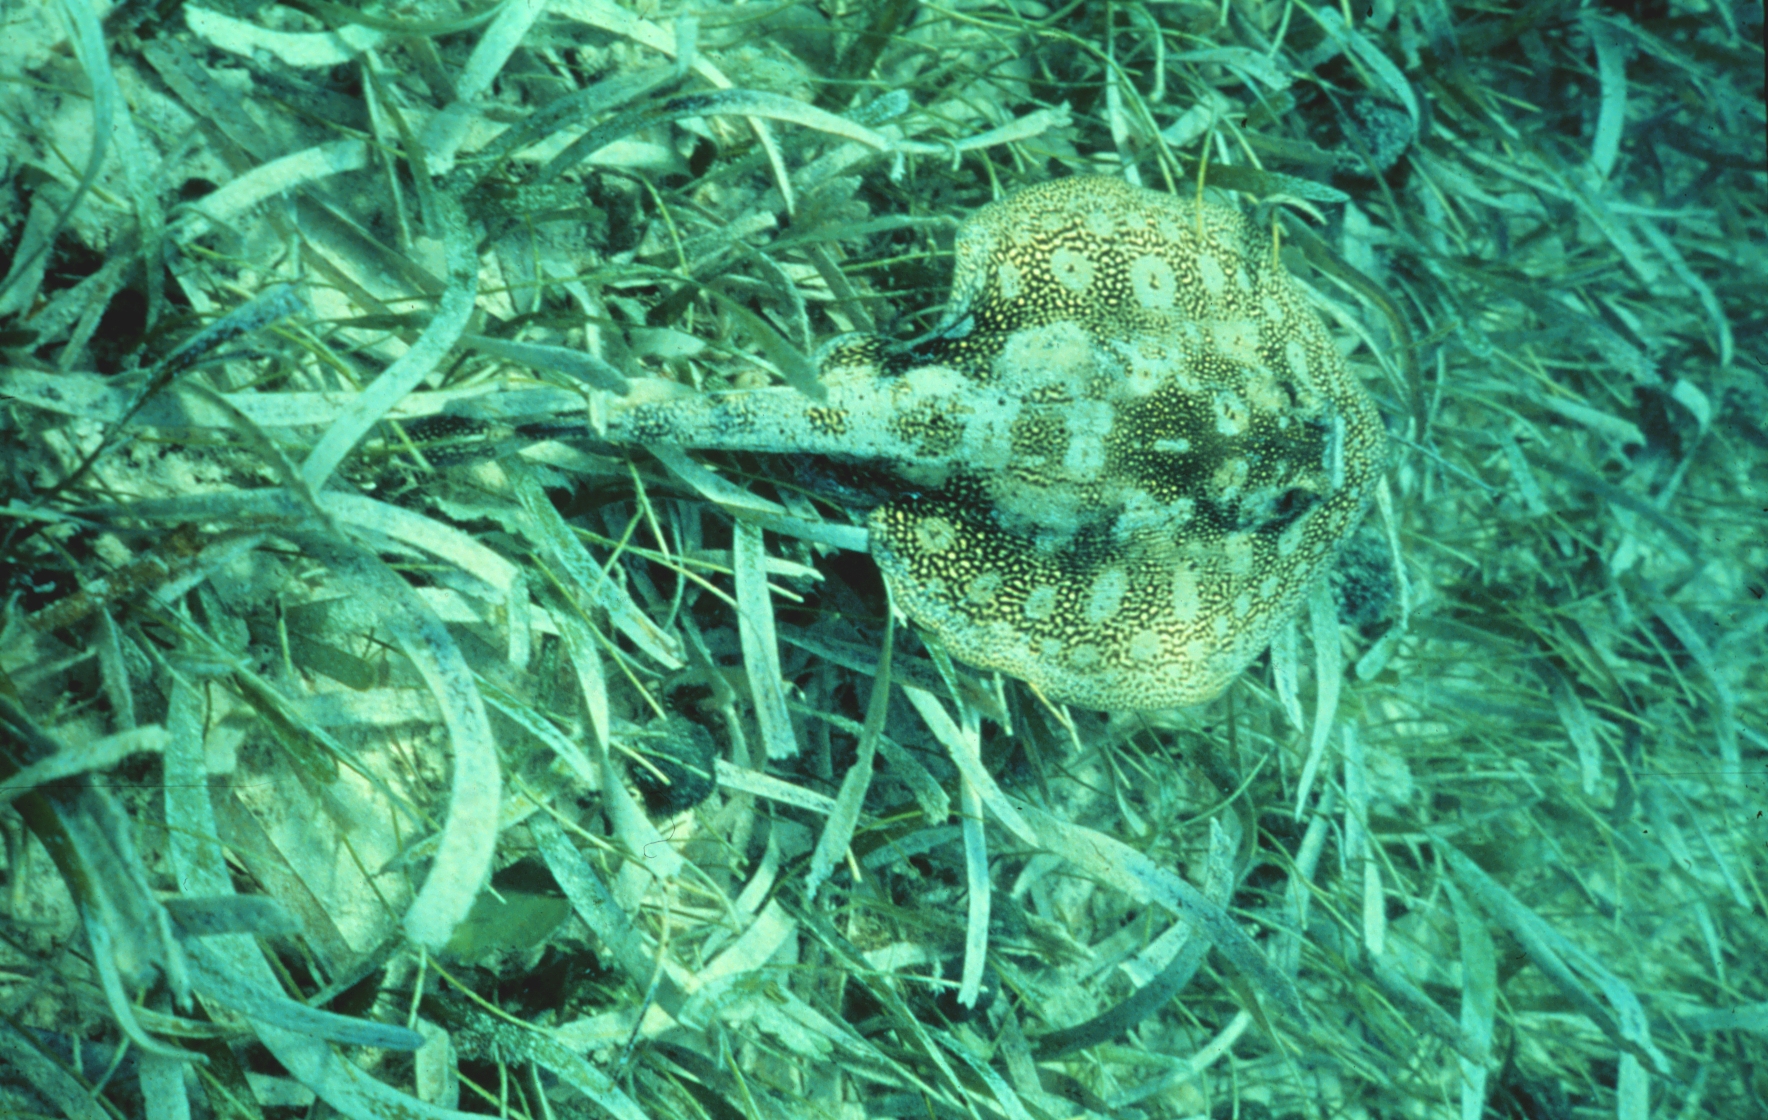 Tracking predators in seagrass beds